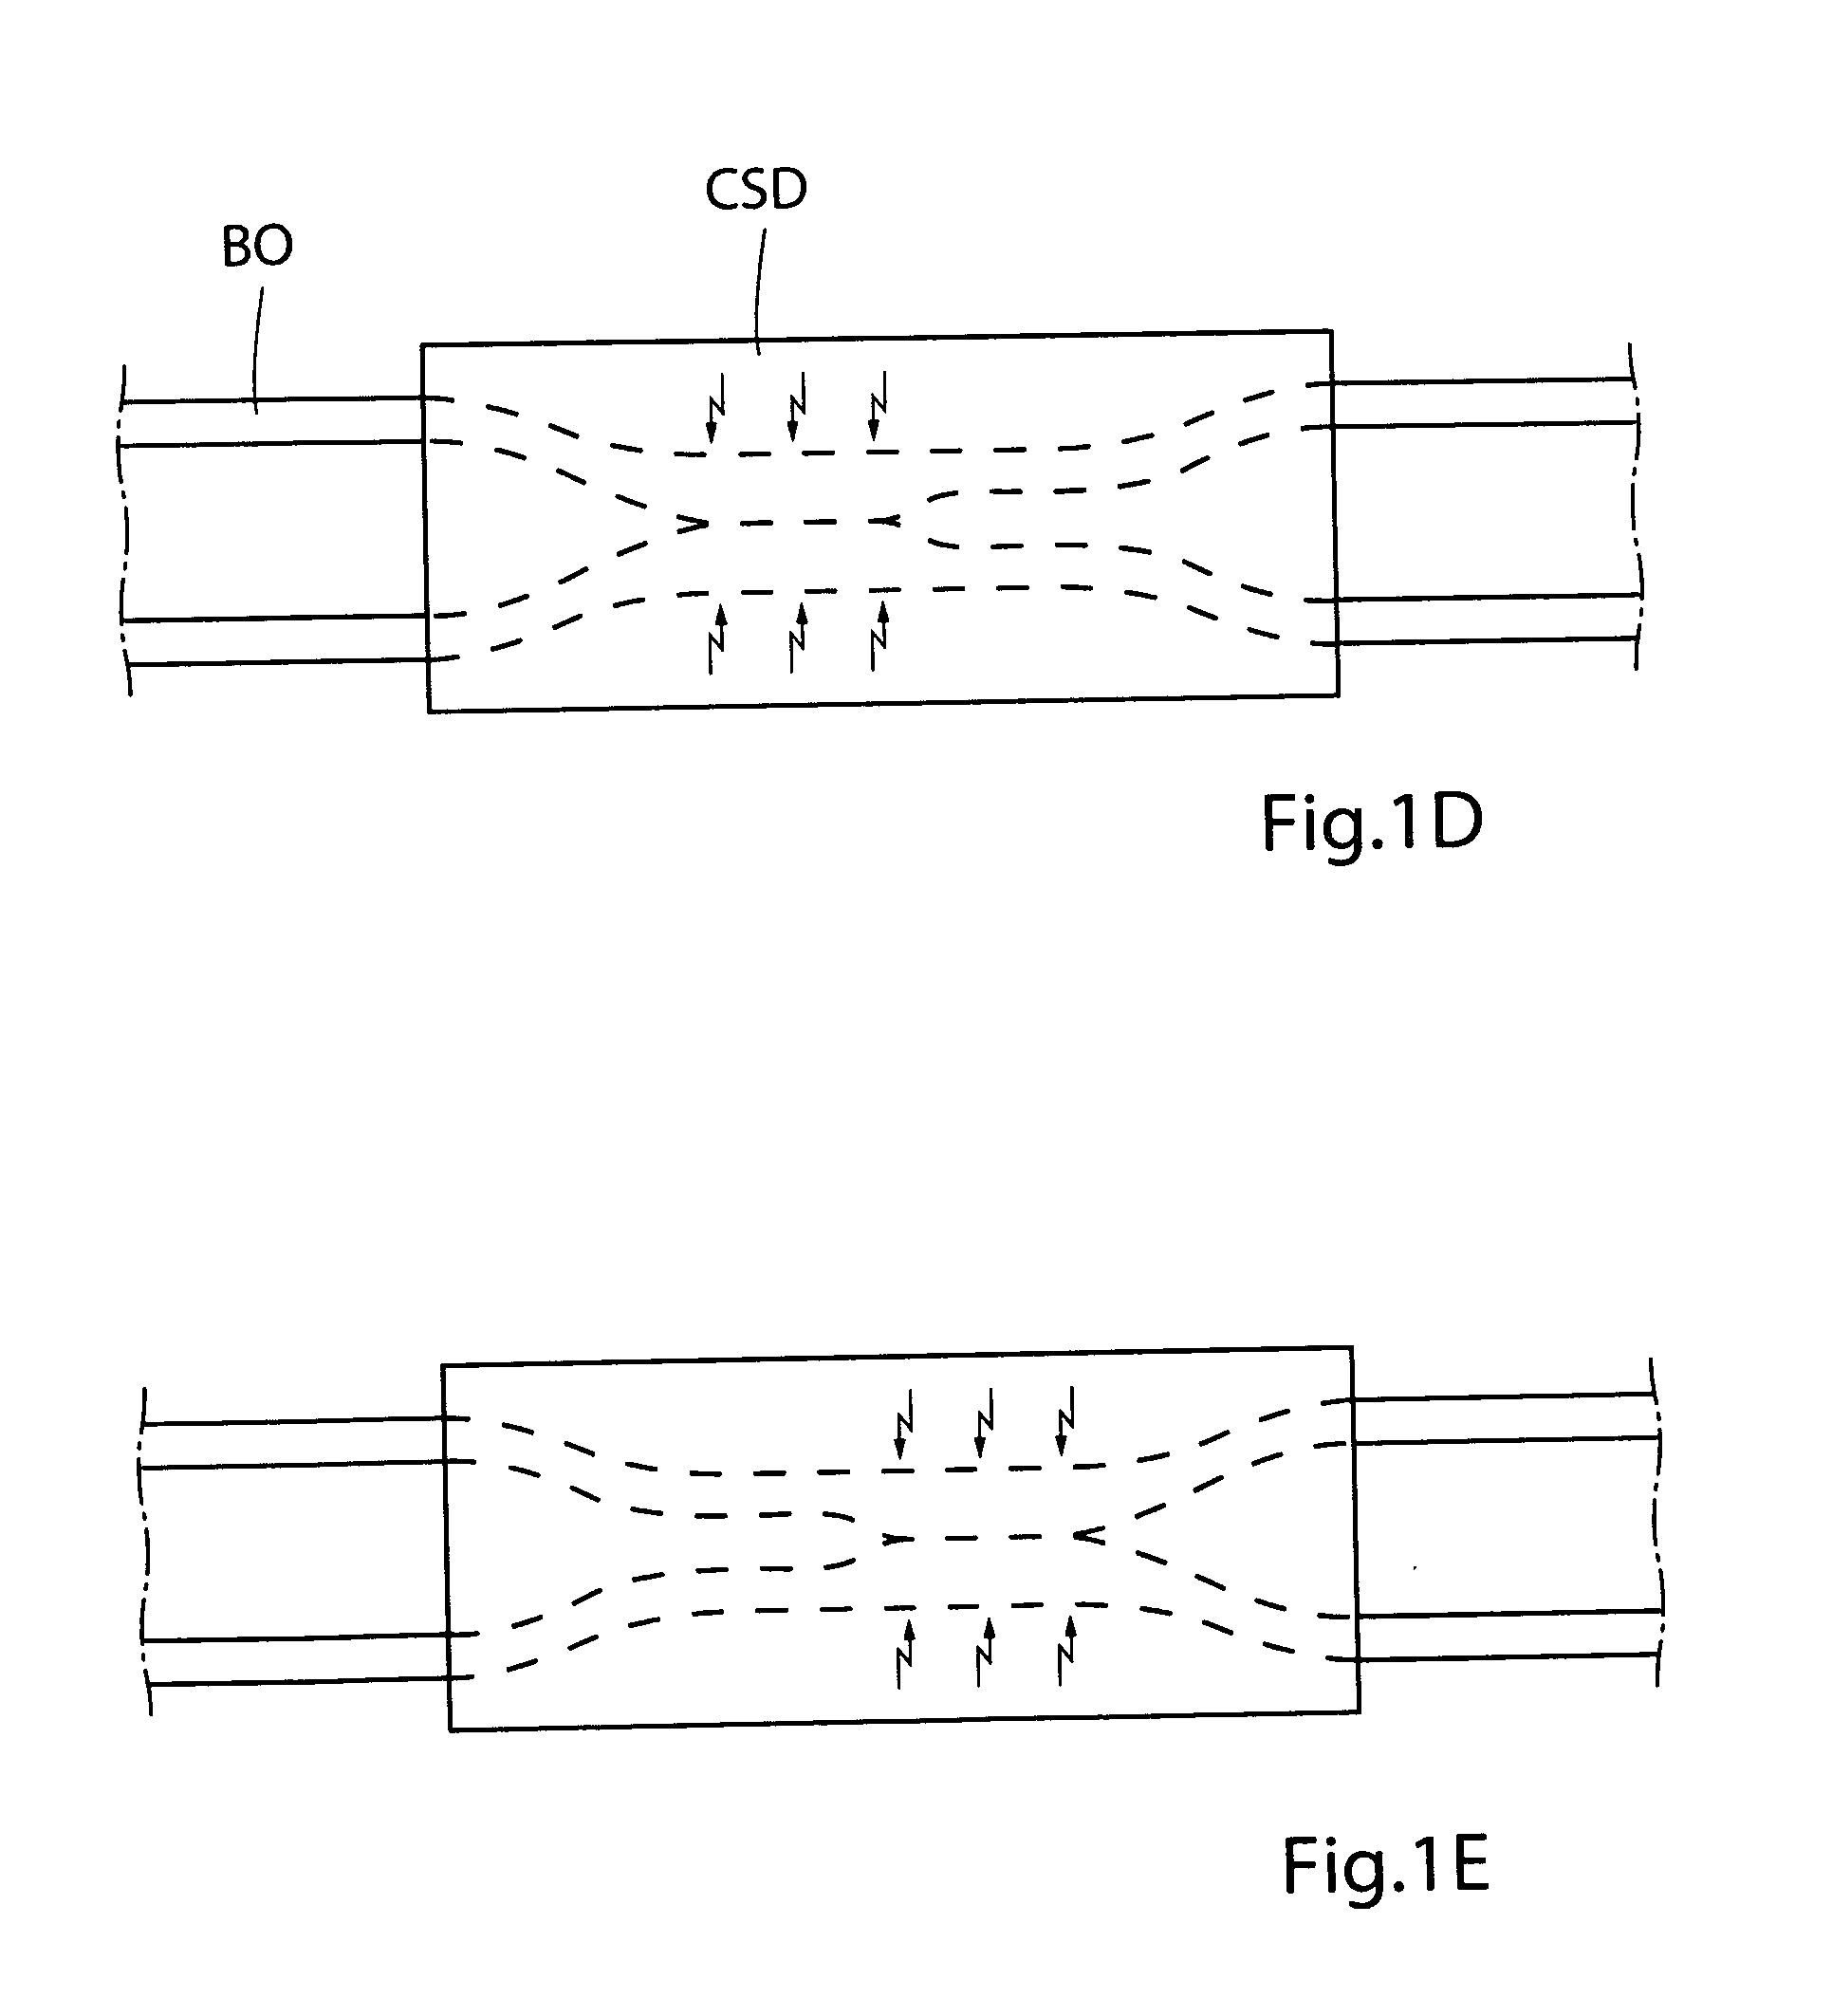 Method for controlling flow of intestinal contents in a patient's intestines